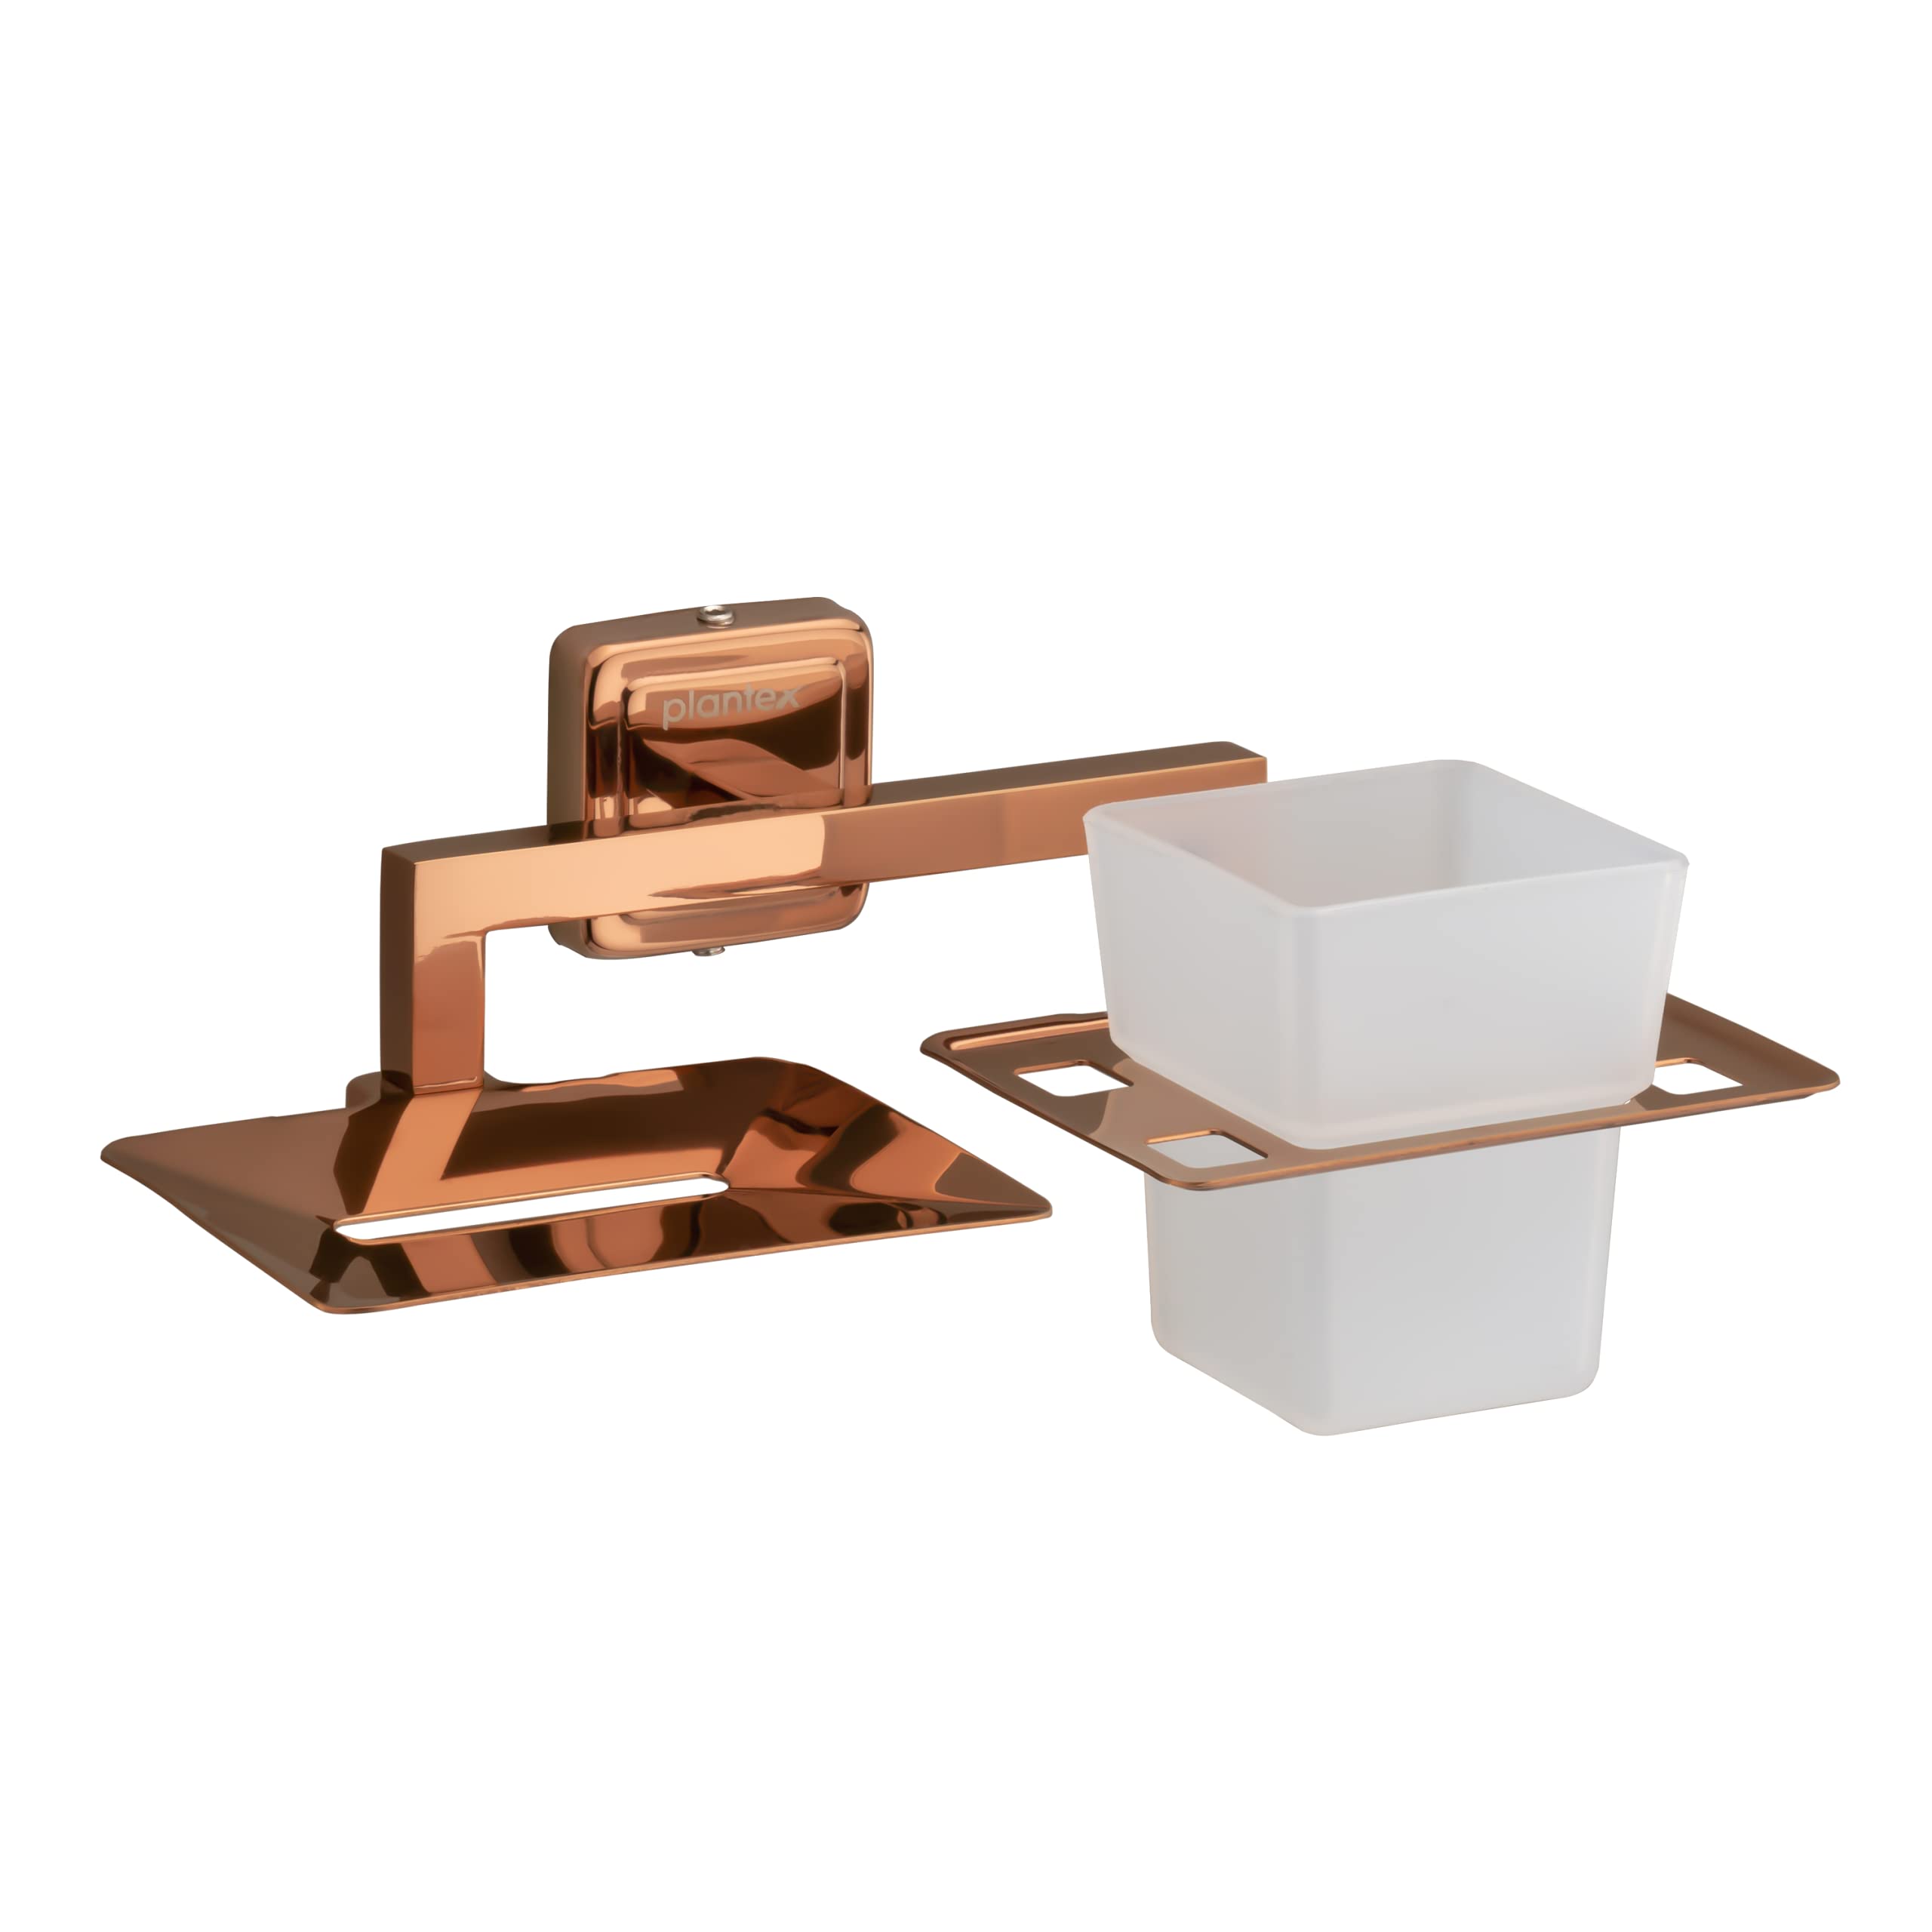 Plantex Stainless Steel 304 Grade Decan 2in1 Soap Dish with Tumbler Holder/Soap Stand/Tooth Brush Holder/Bathroom Accessories Pack of 1 (650 - PVD Rose Gold)